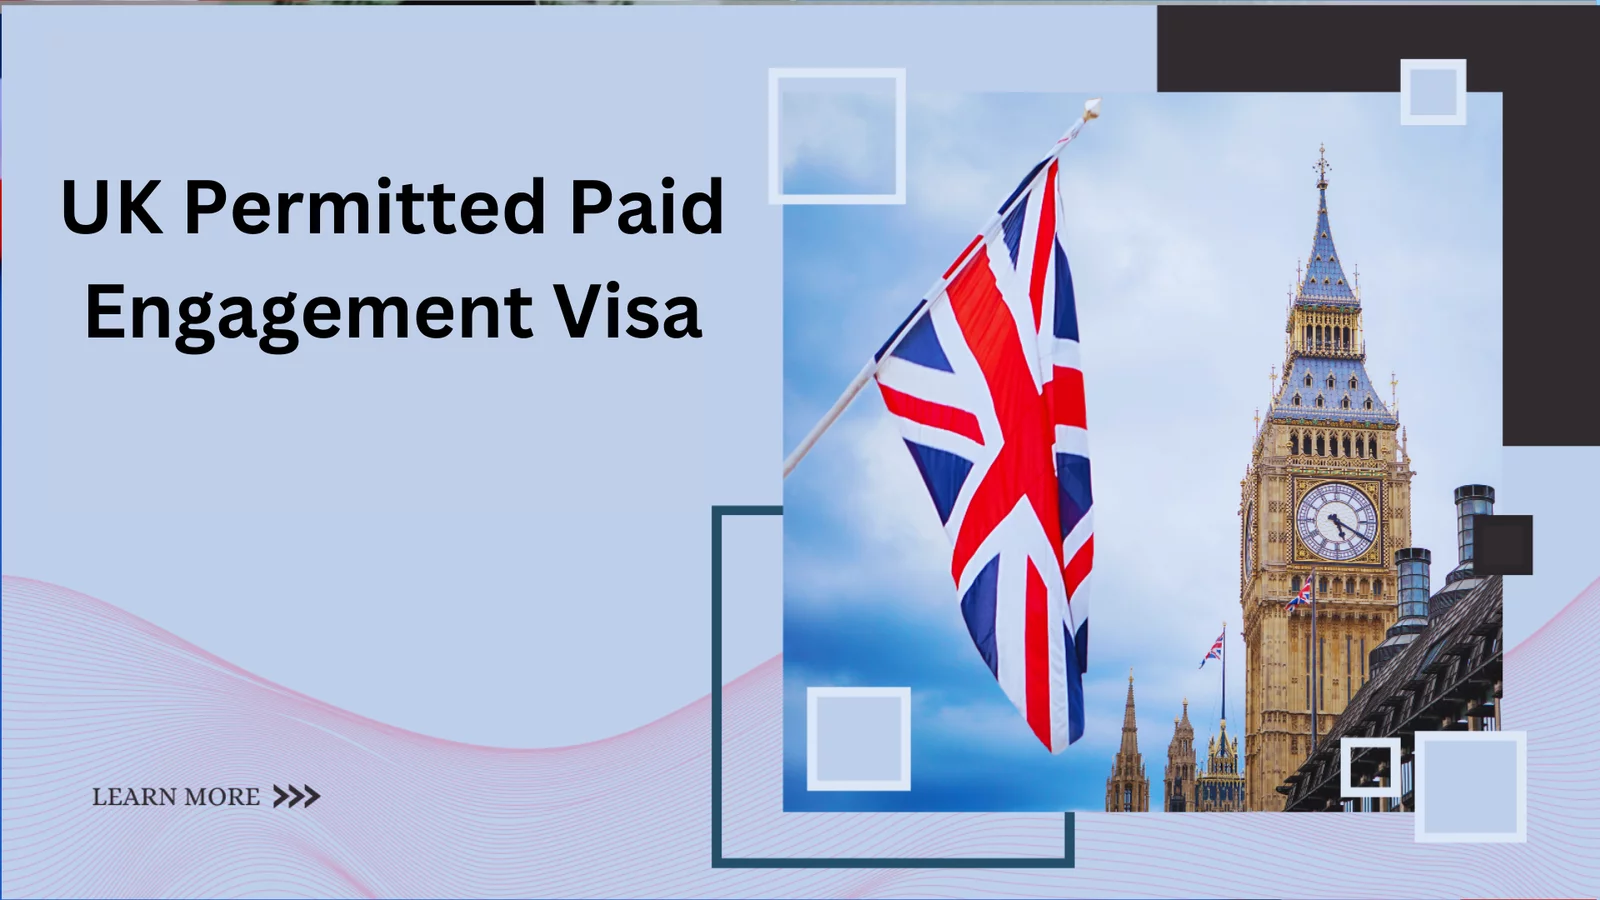 UK Permitted Paid Engagement Visa